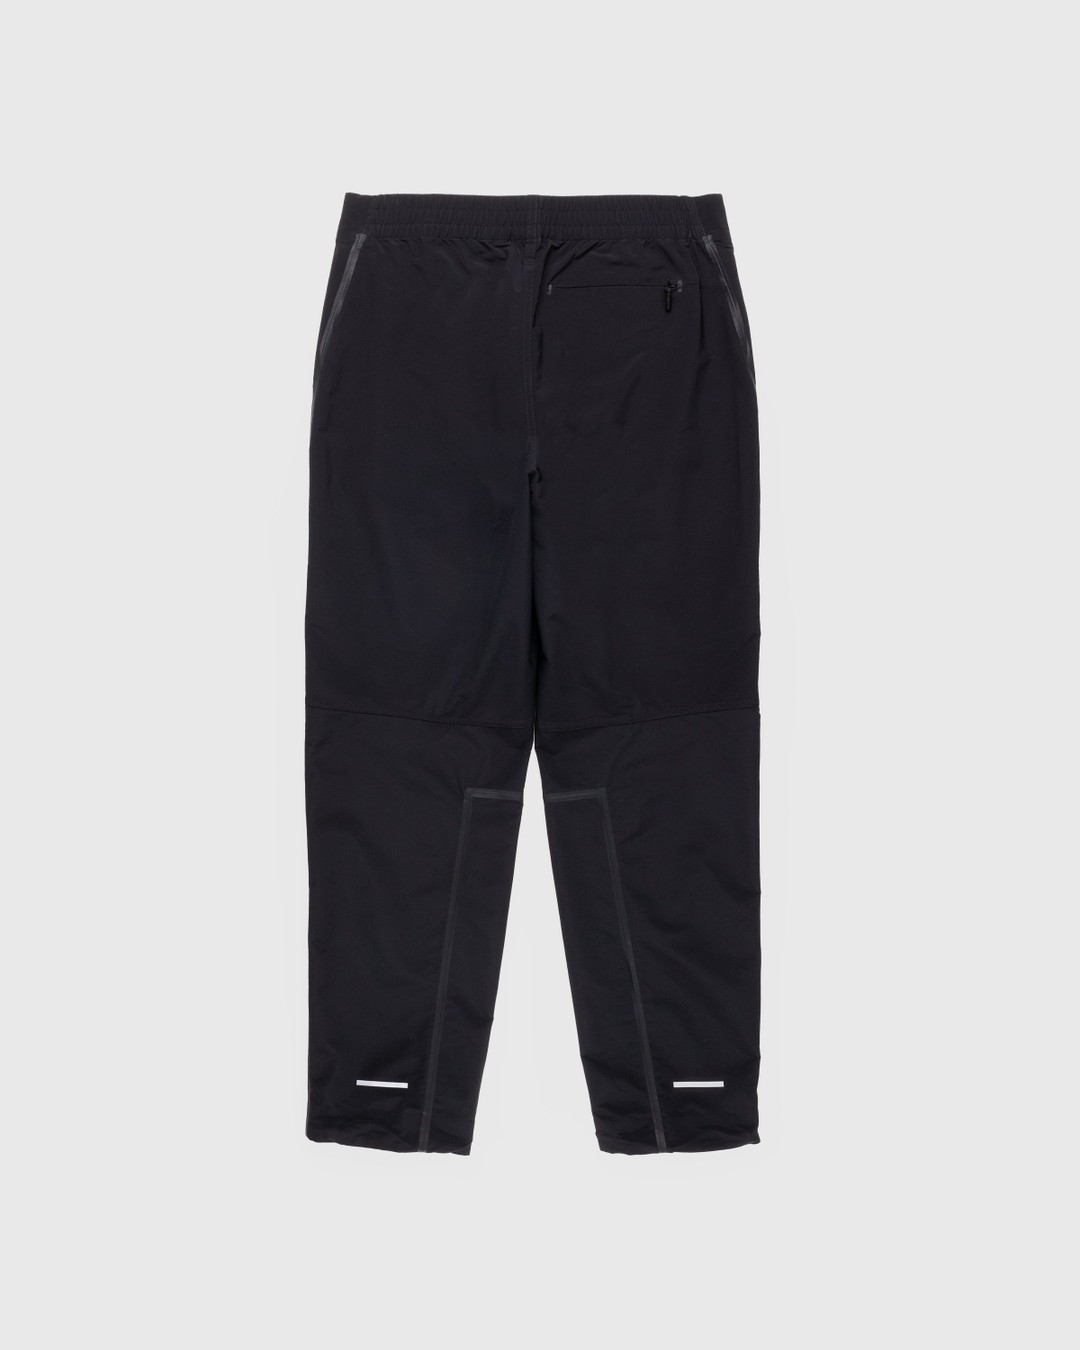 The North Face – RMST Mountain Pant Black - Track Pants - Black - Image 2